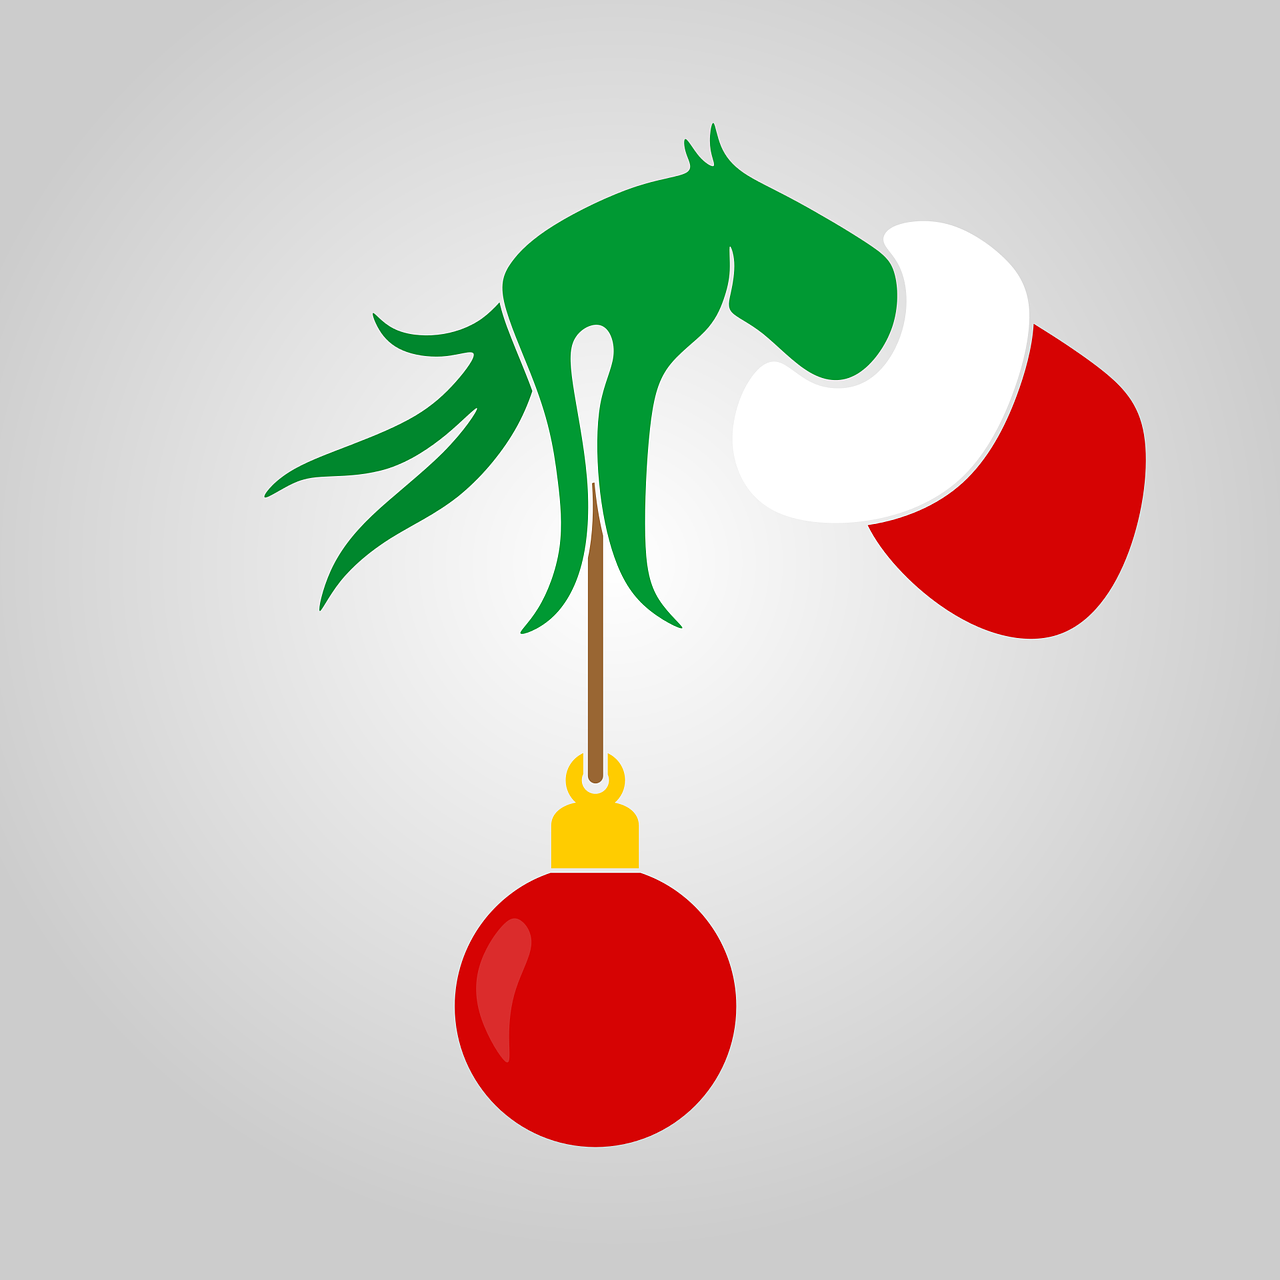 The Grinch's hand, holding a round Christmas ornament by a string.